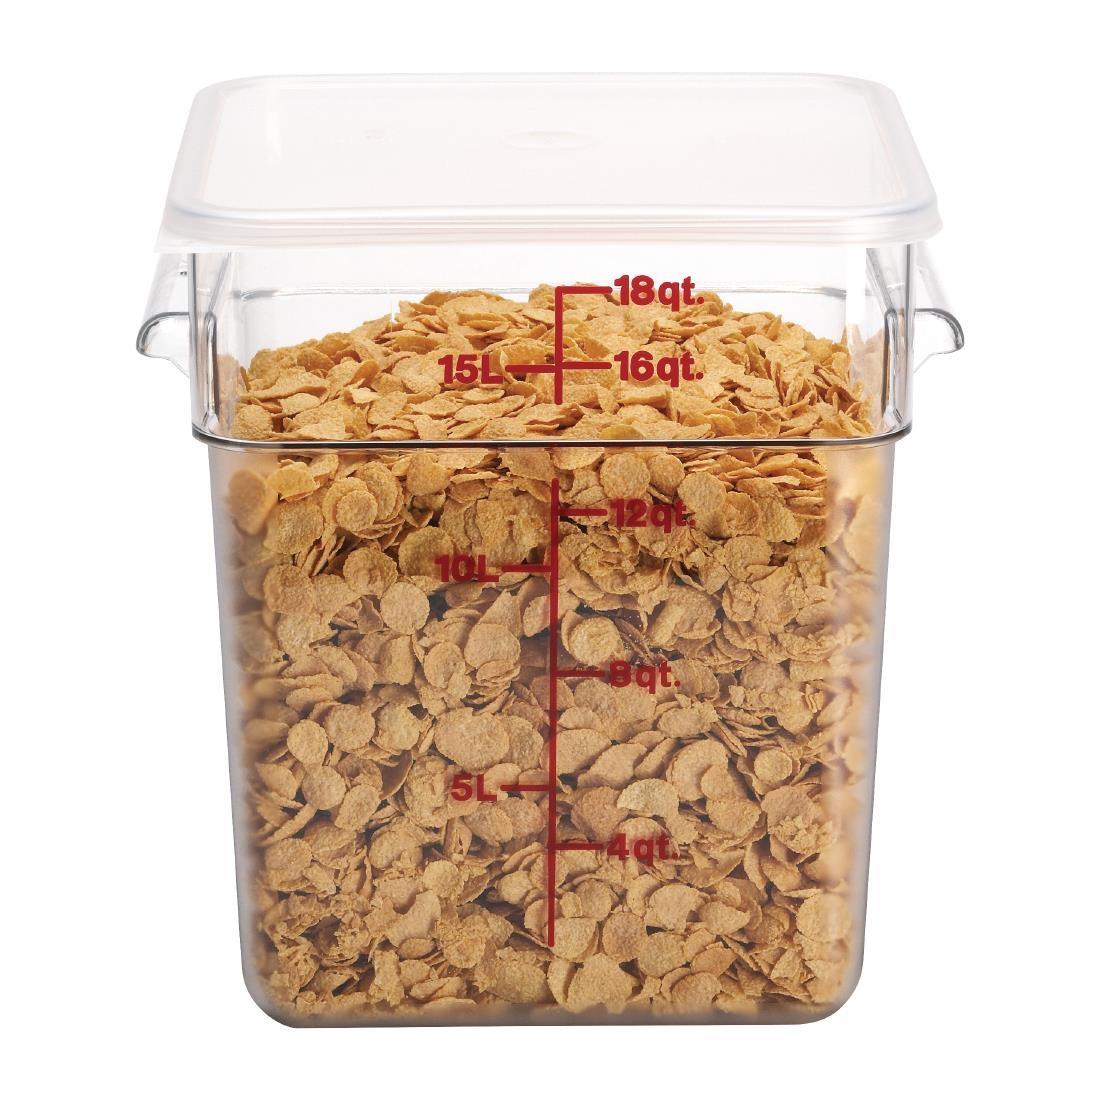 Cambro Square Polycarbonate Food Storage Container 17.2 Ltr - DT198  - 2